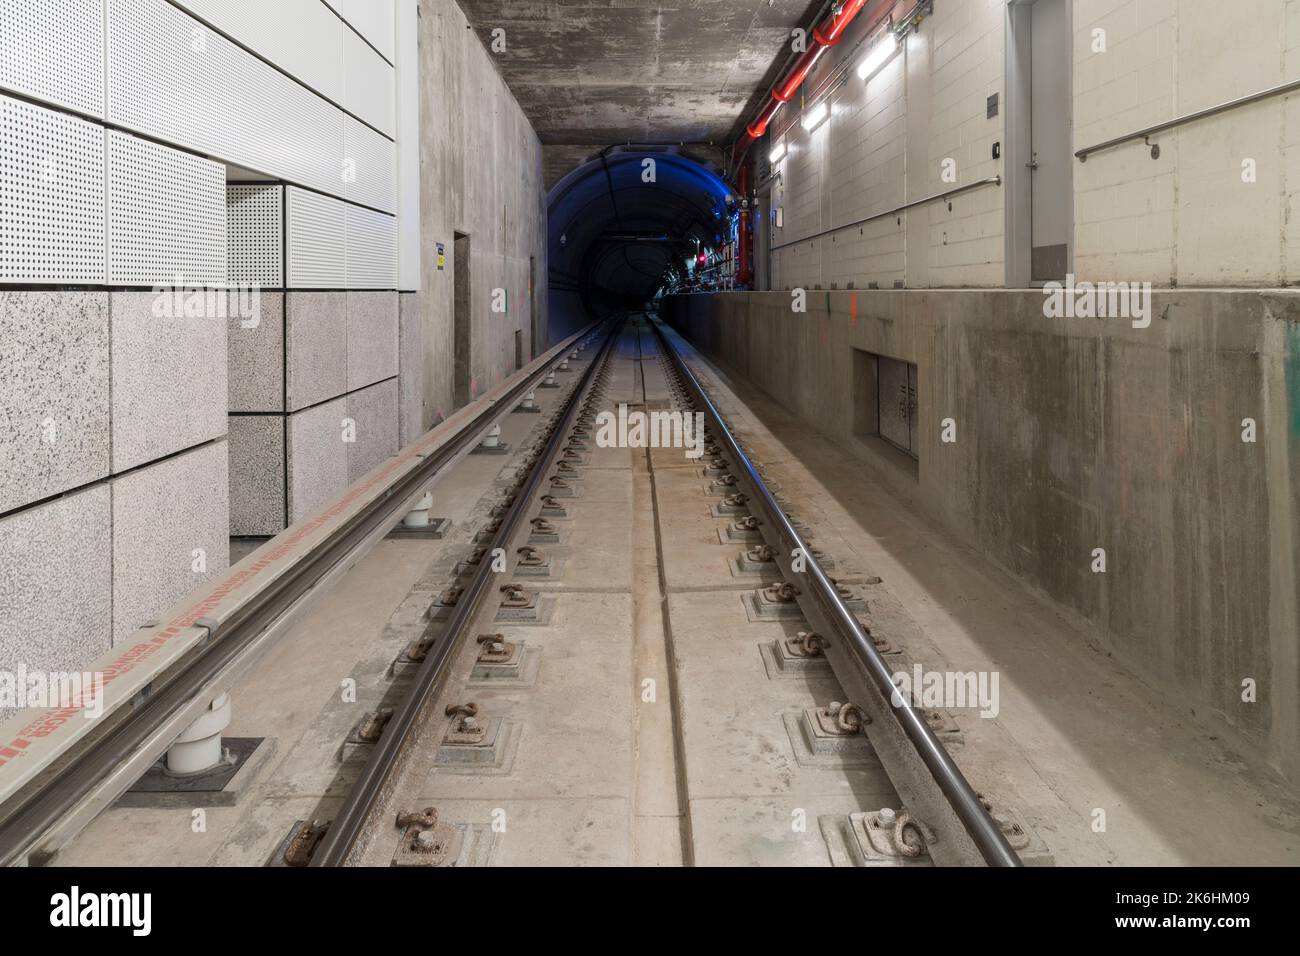 New York City Subway, view of subway tunnel from track level Stock Photo